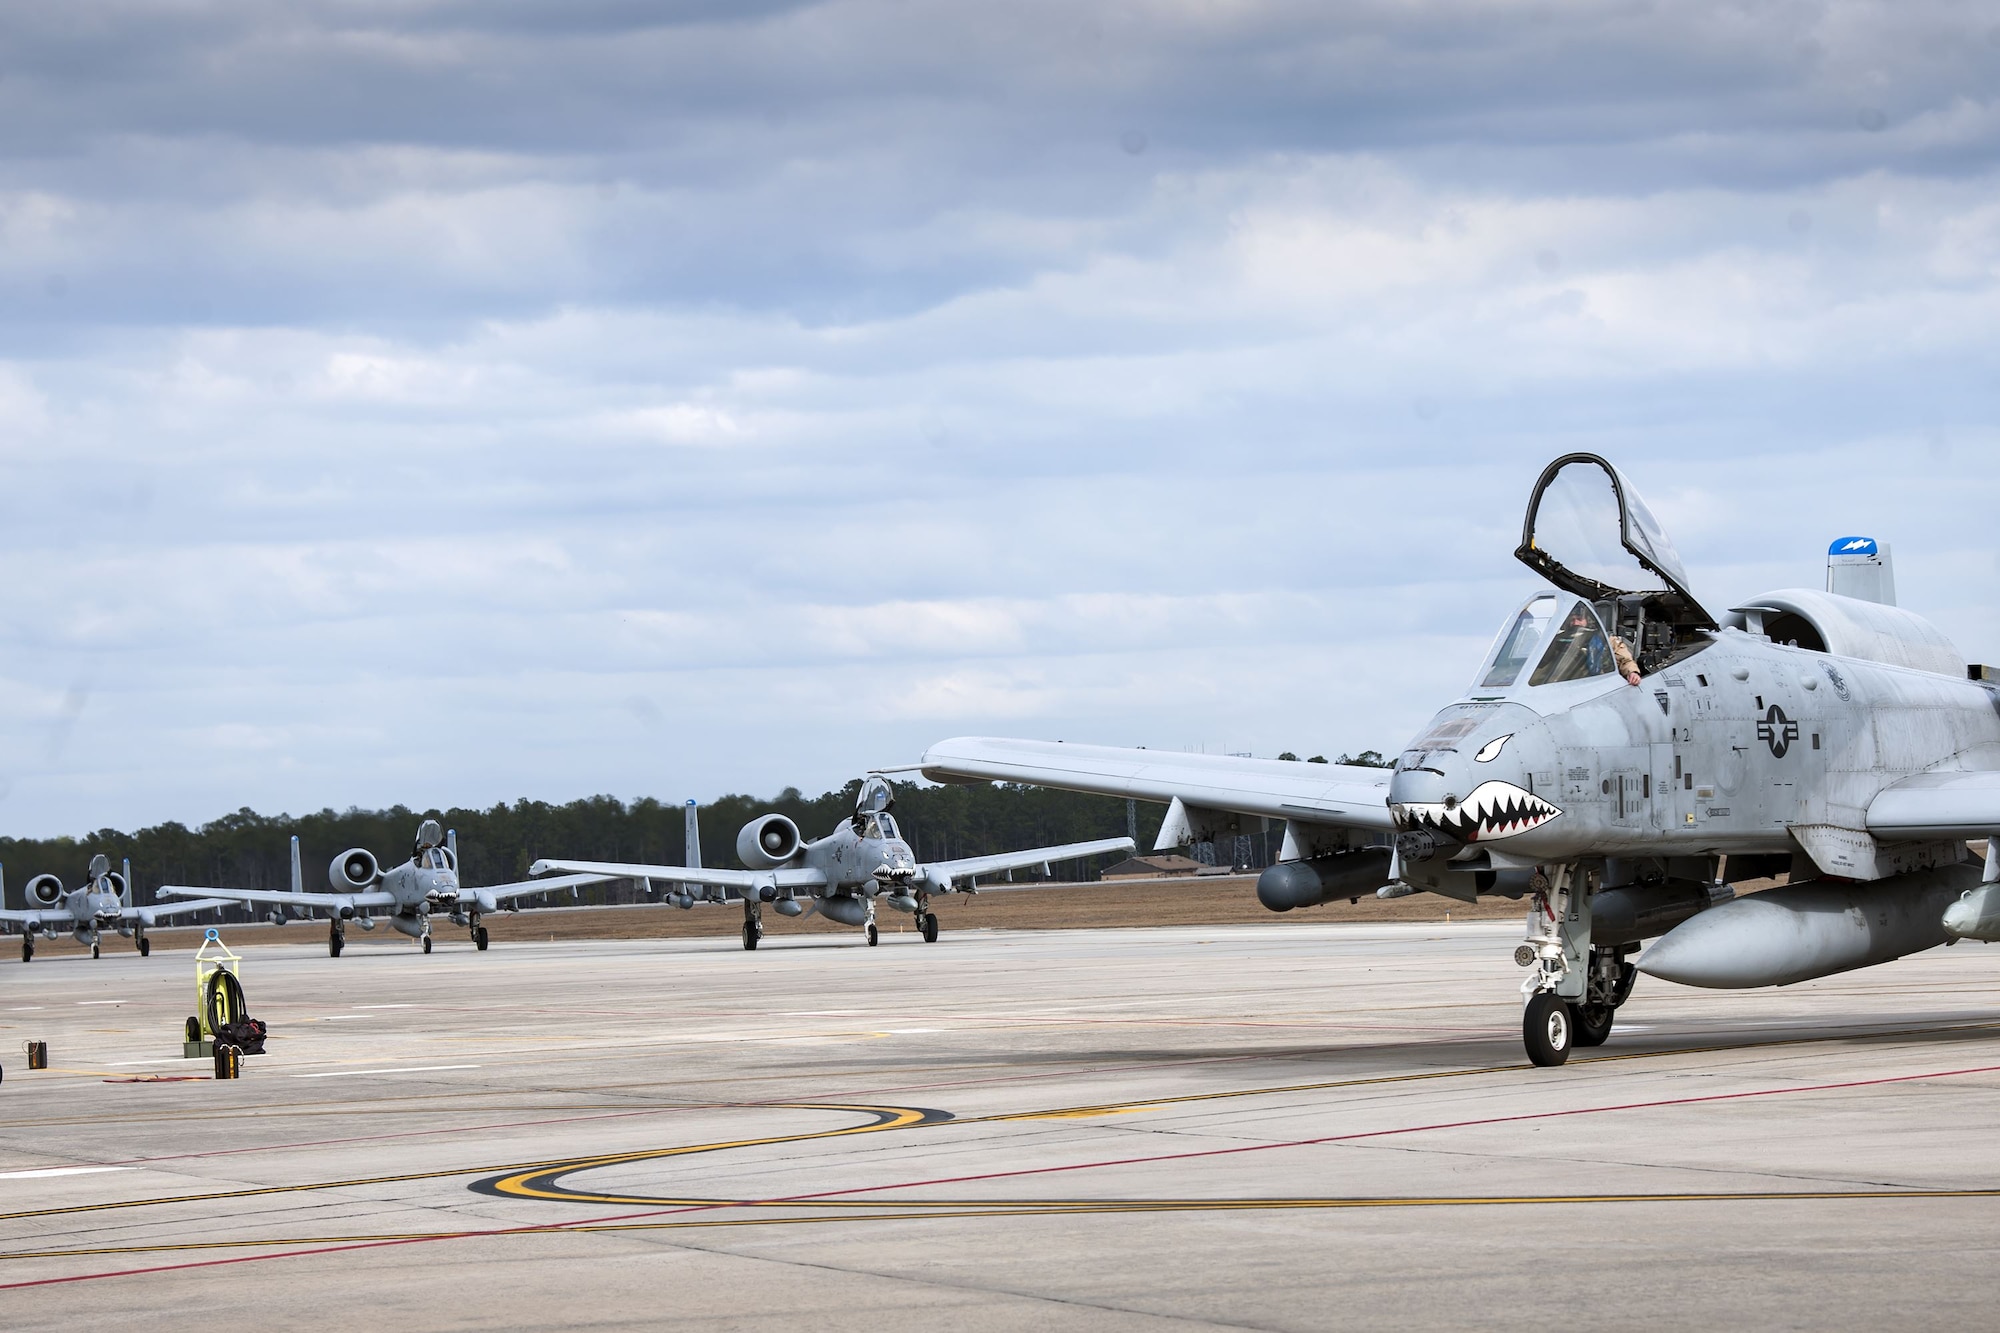 Four A-10C Thunderbolt IIs taxi toward their parking spots after returning from a deployment, Jan. 26, 2018, at Moody Air Force Base, Ga.  During the seven-month deployment the 74th FS flew more than 1,700 sorties, employed weapons more than 4,400 times, destroyed 2,300 targets and killed 2,800 insurgents. (U.S. Air Force photo by Airman Eugene Oliver)